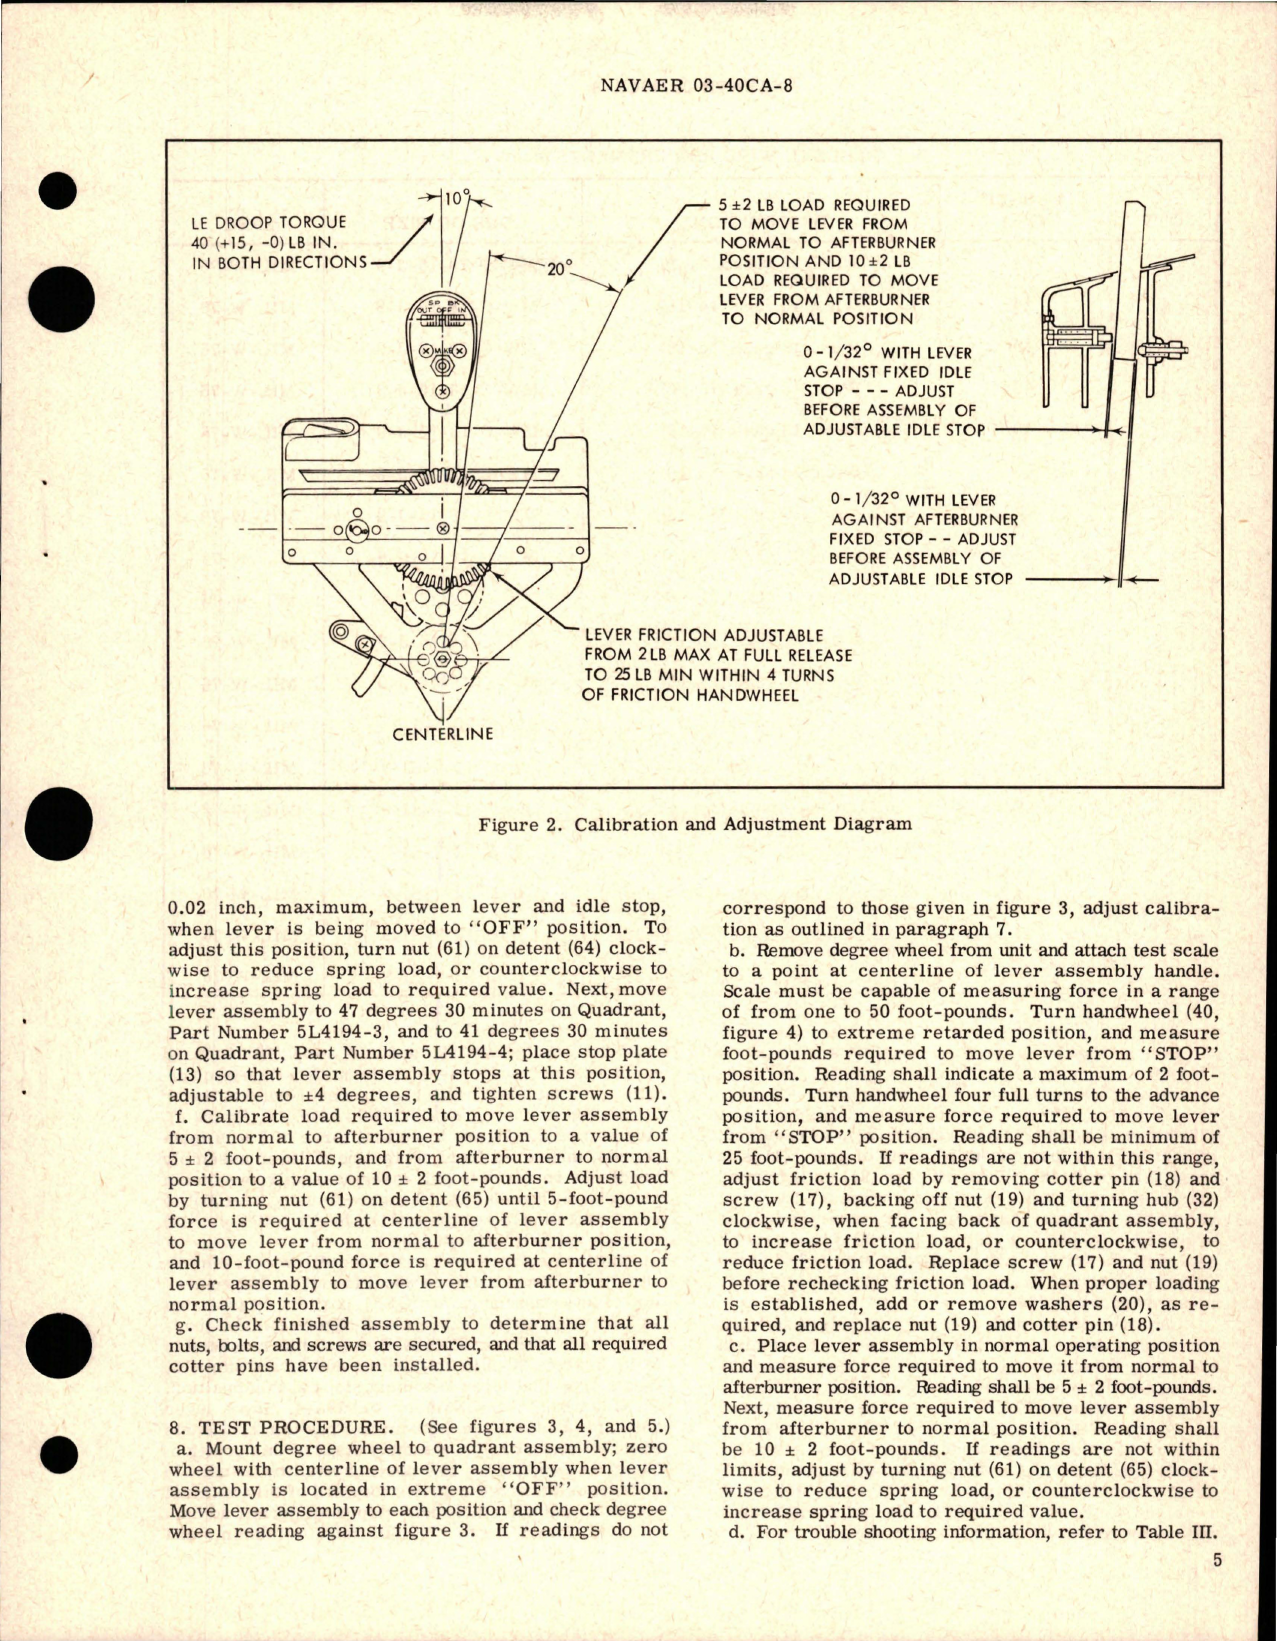 Sample page 7 from AirCorps Library document: Overhaul Instructions with Parts Breakdown for Engine Control Quadrant - Parts 5L4194-3 and 5L4194-4